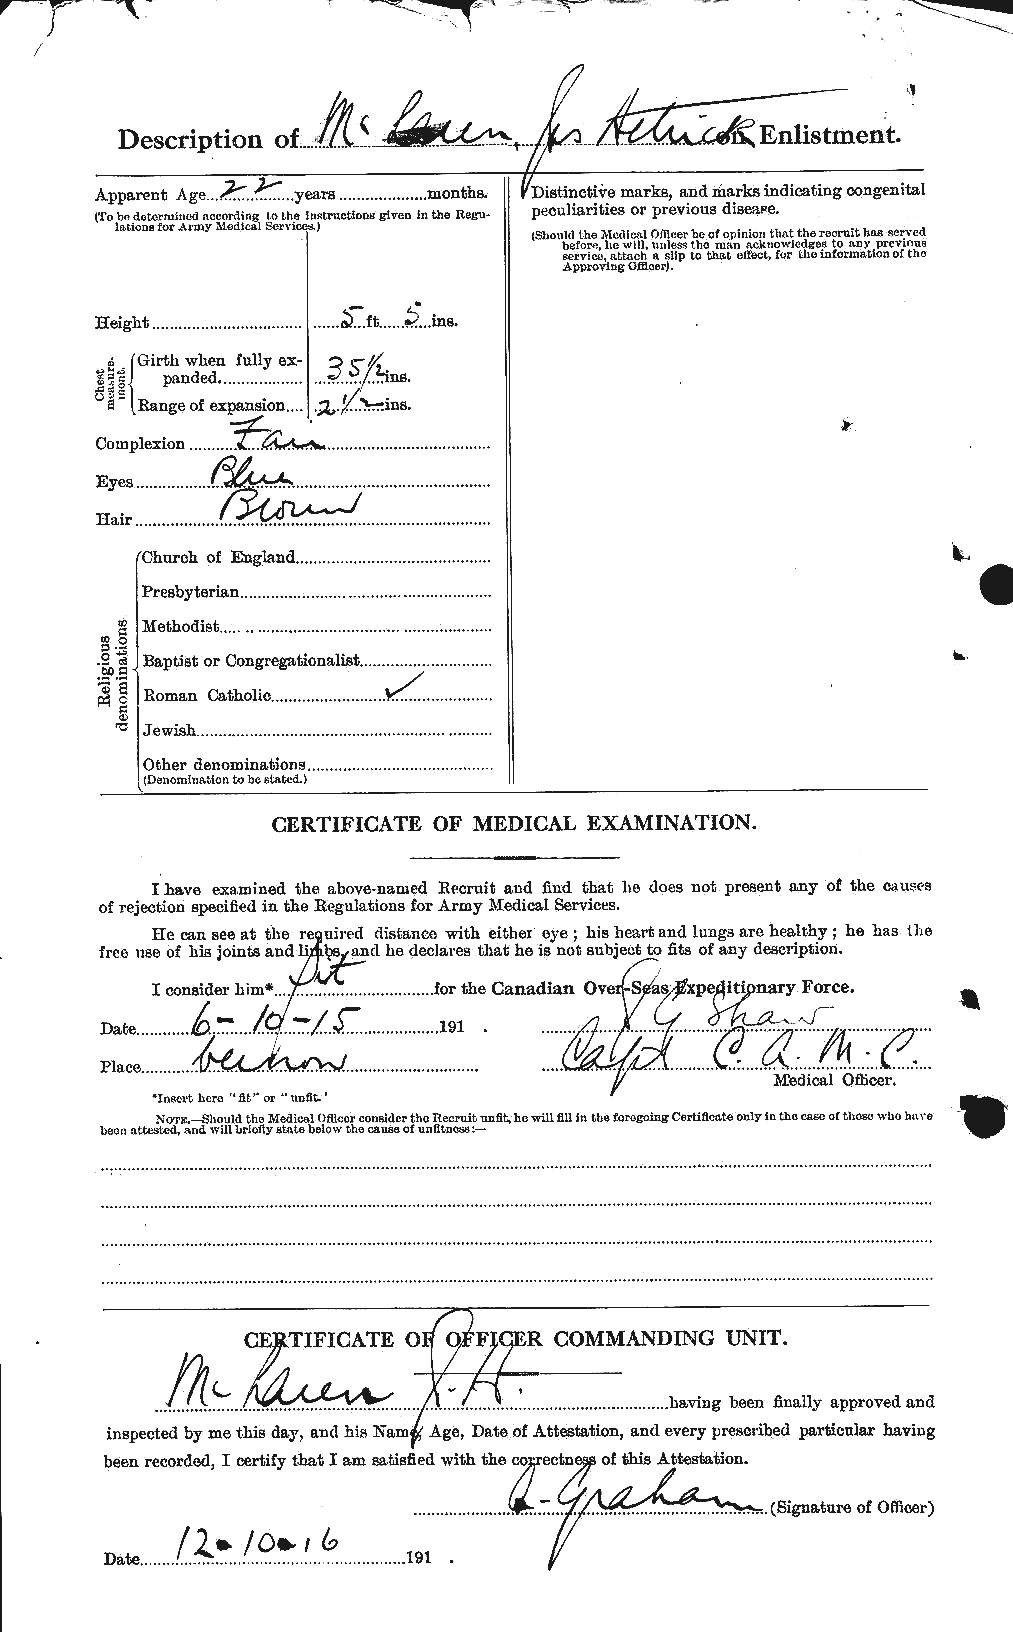 Personnel Records of the First World War - CEF 534172b